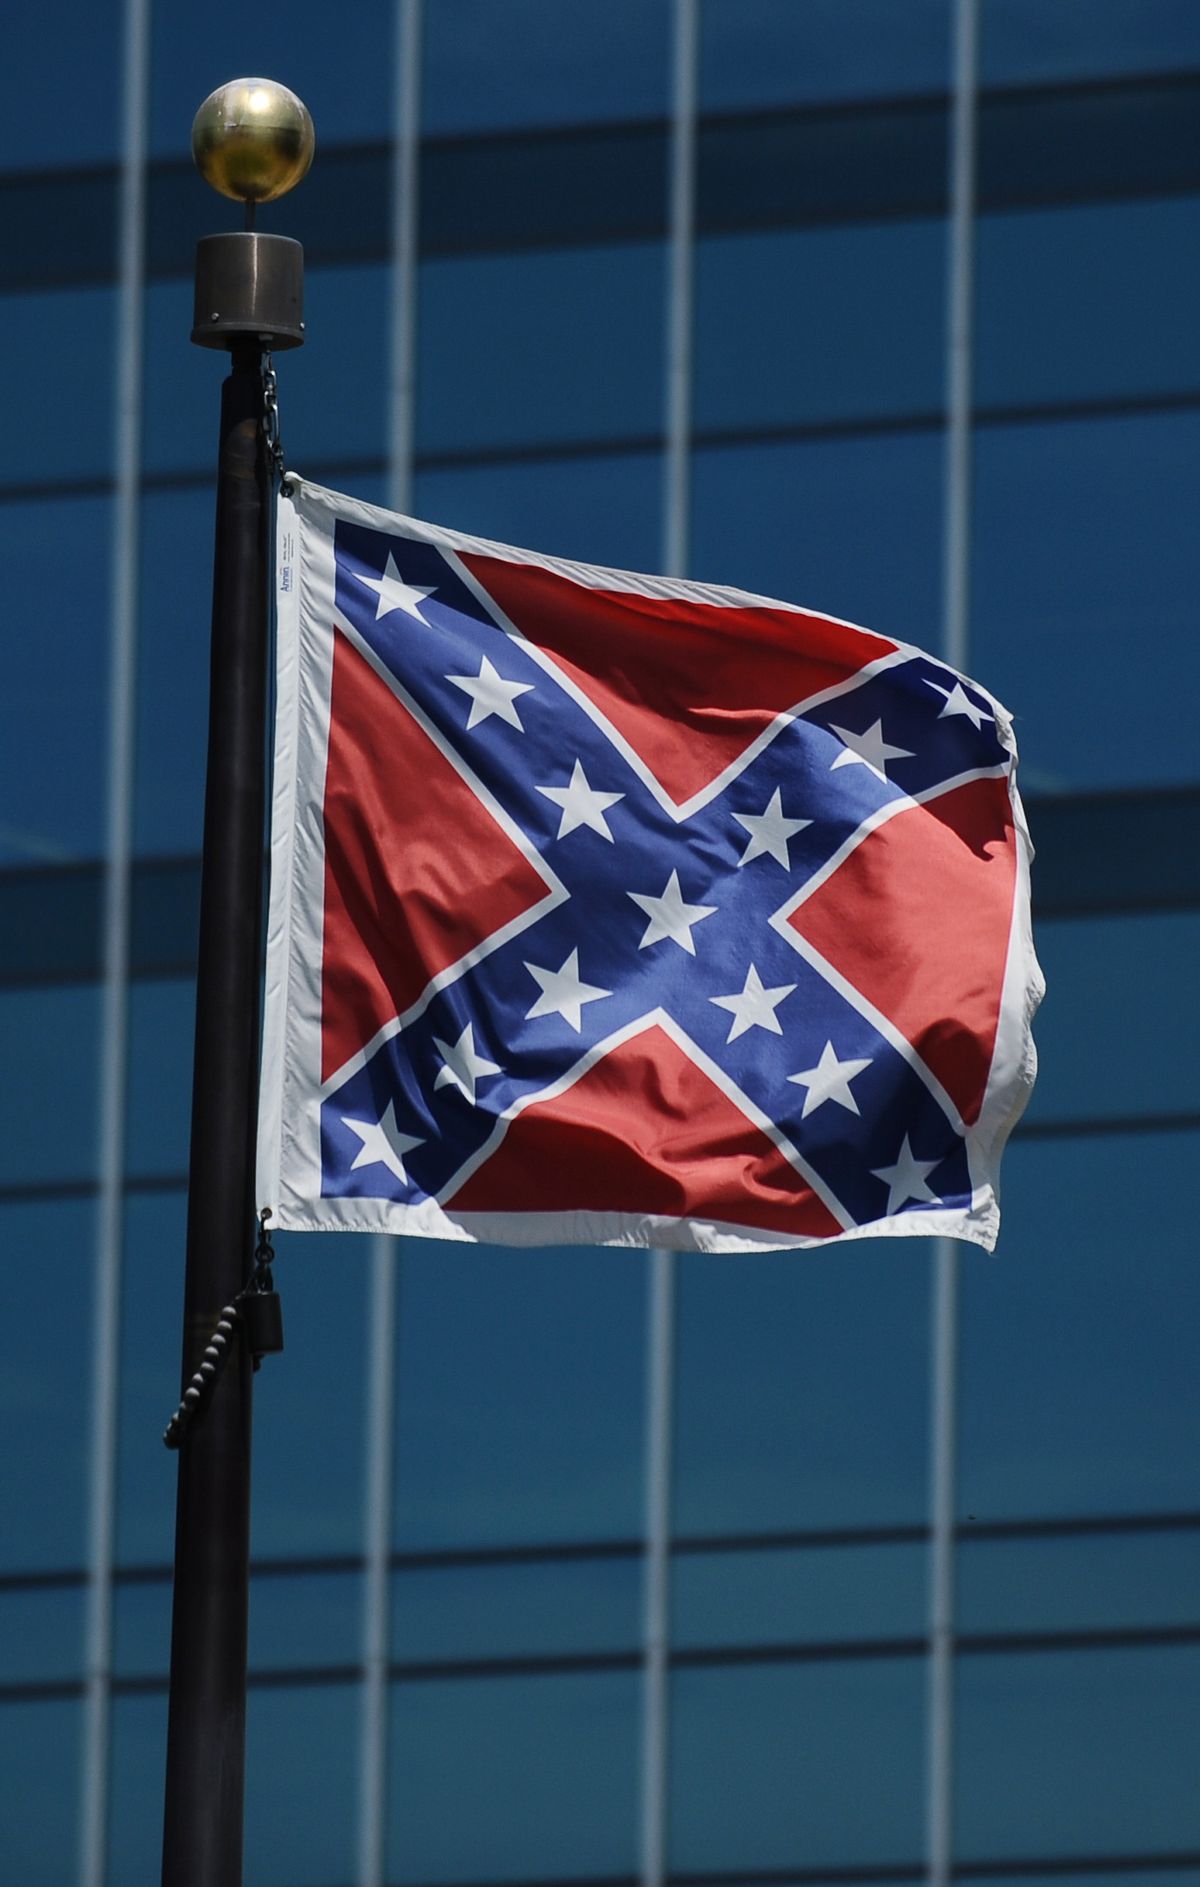 The Confederate flag flies near the South Carolina Statehouse in Columbia, S.C. (Associated Press)